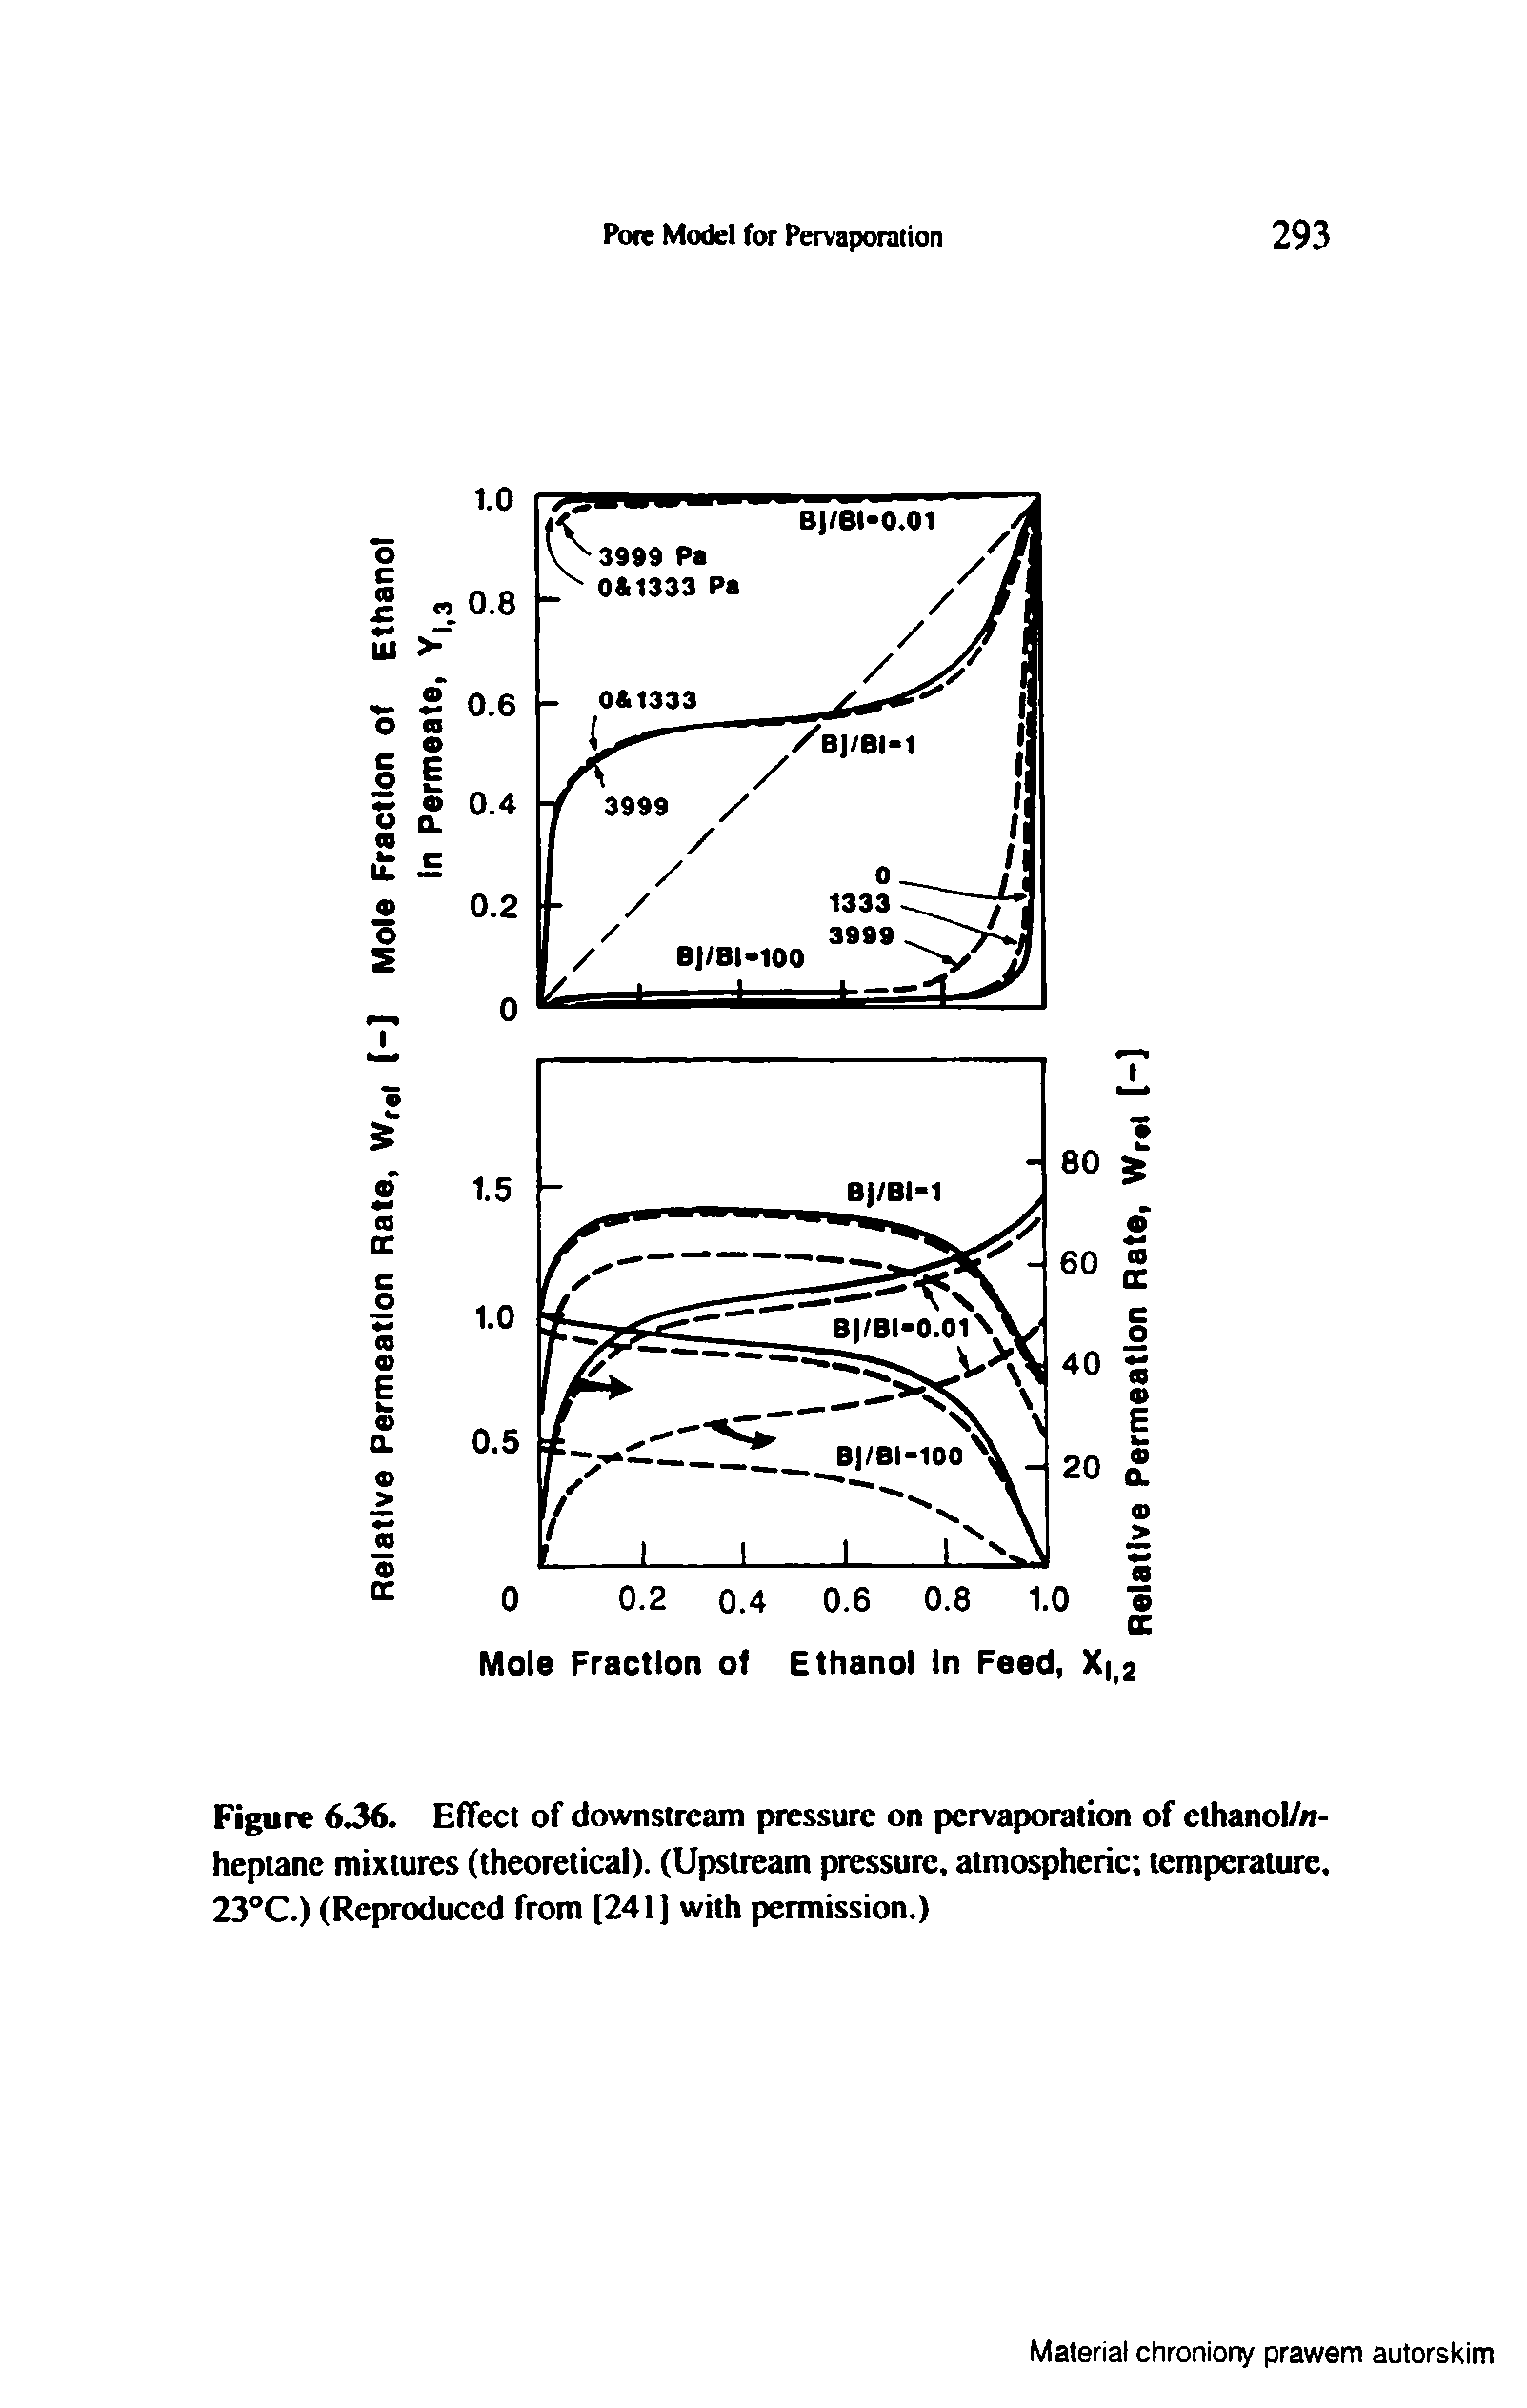 Figure 6,36. Effect of downstream pressure on pervaporation of ethanol/n-heptane mixtures (theoretical). (Upstream pressure, atmospheric temperature, 23 C.) (Reproduced from [241] with permission,)...